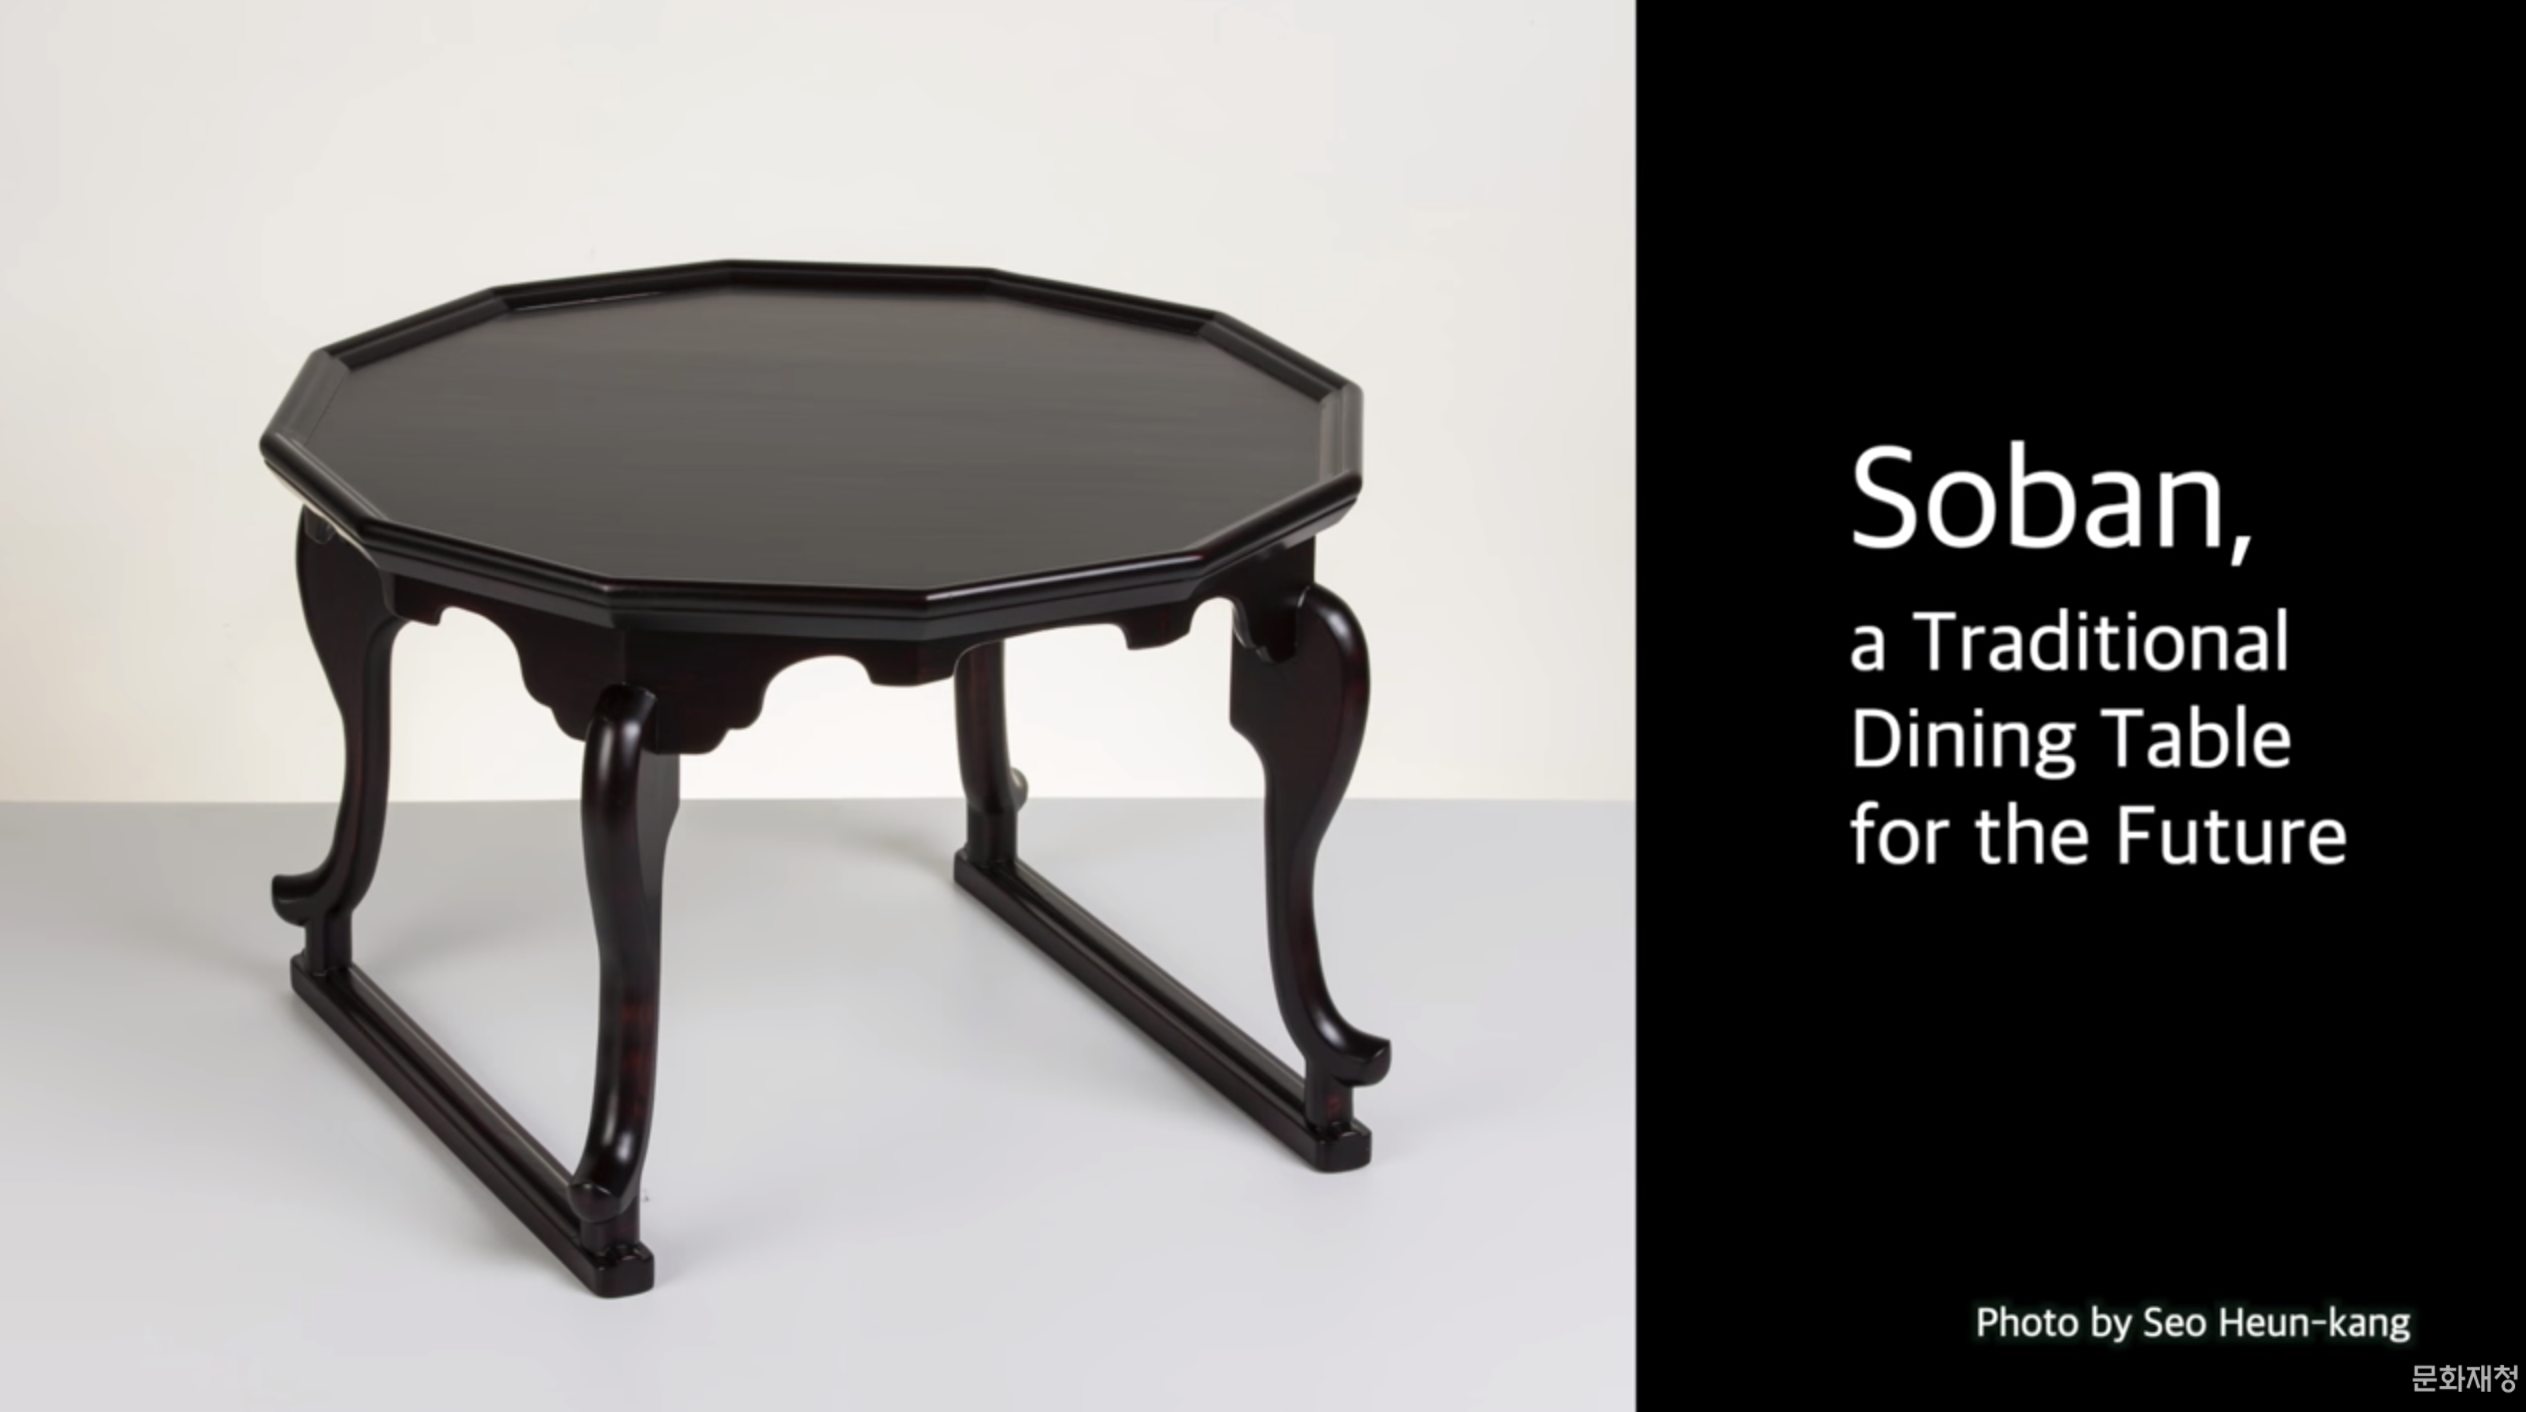 Soban, a Traditional Dining Table for the Future image